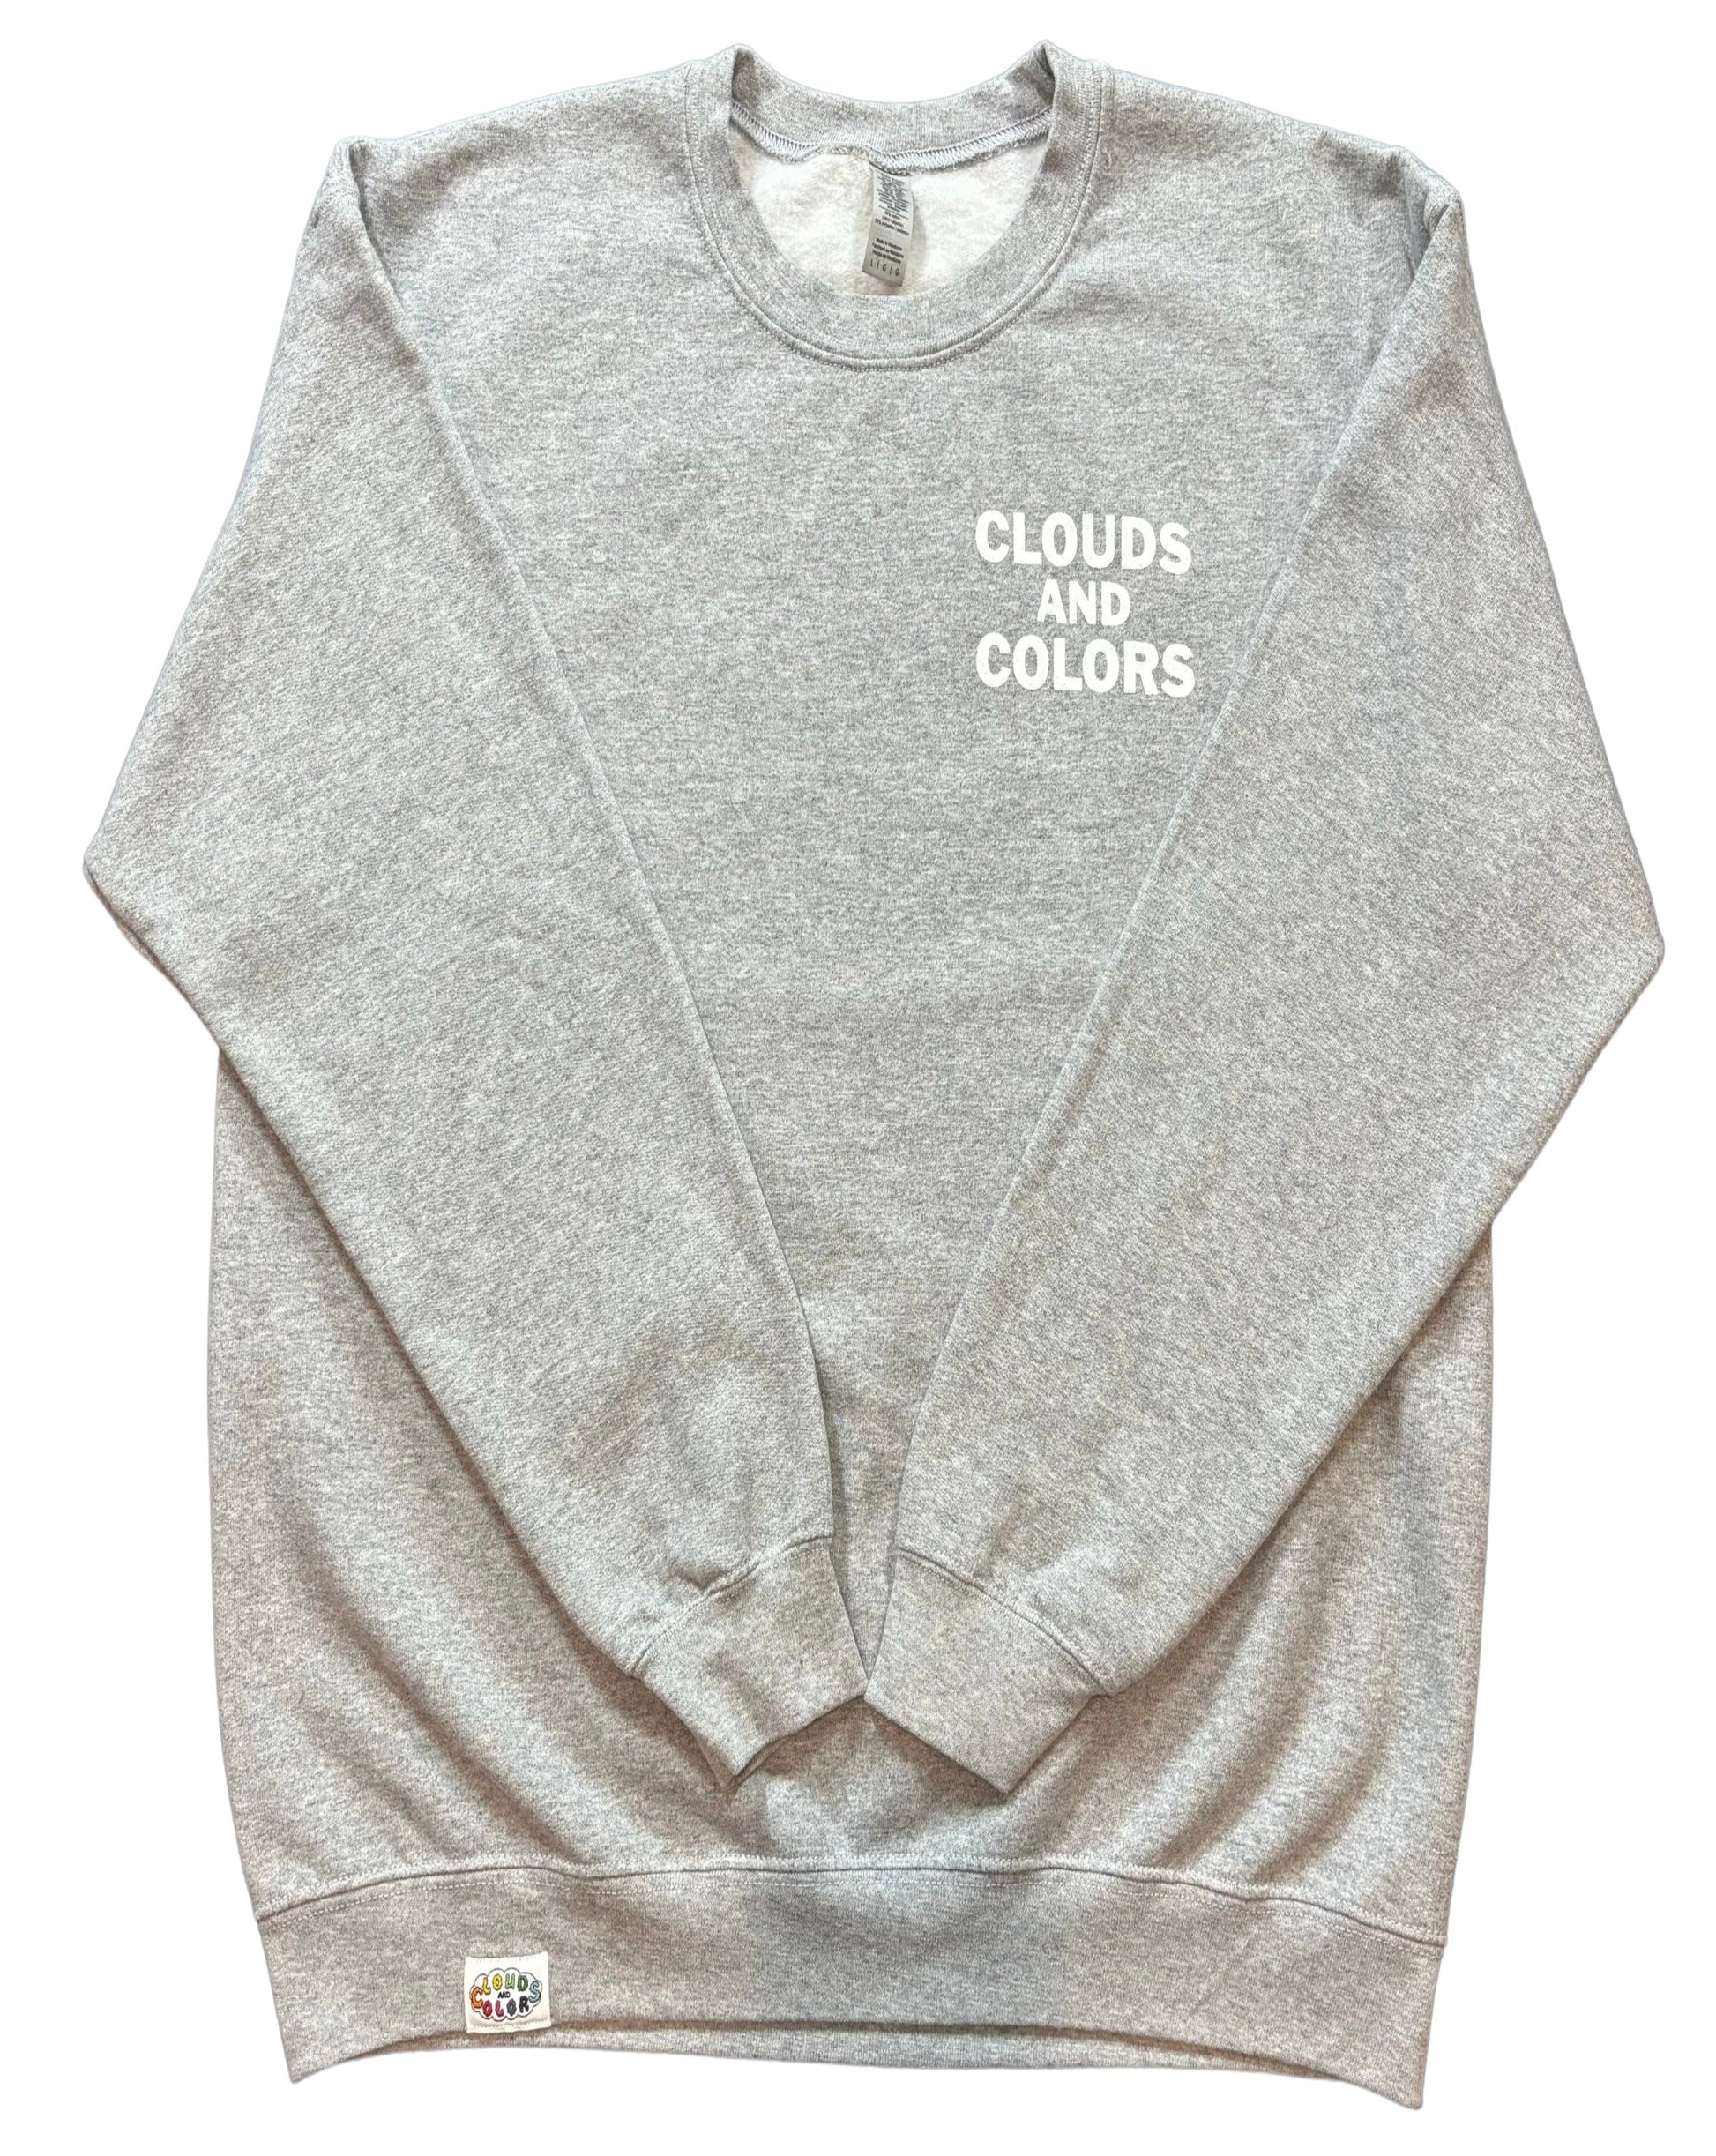 Clouds and Colors Crewneck - Gray - Clouds and Colors Clothing